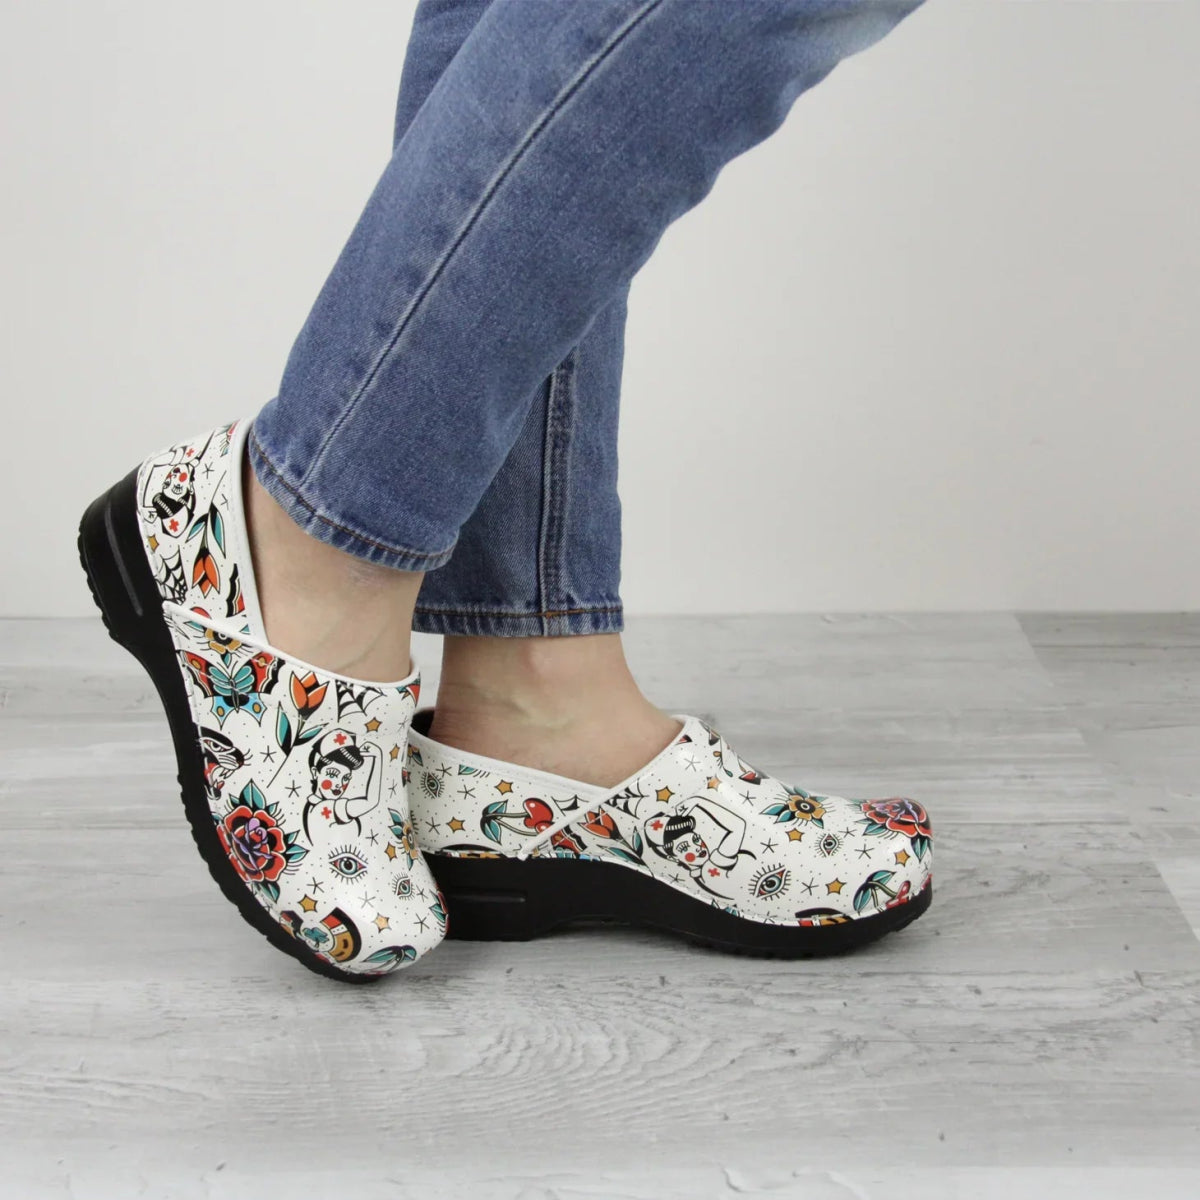 SANITA ROCKABILLY UNISEX CLOG IN WHITE - TLW Shoes